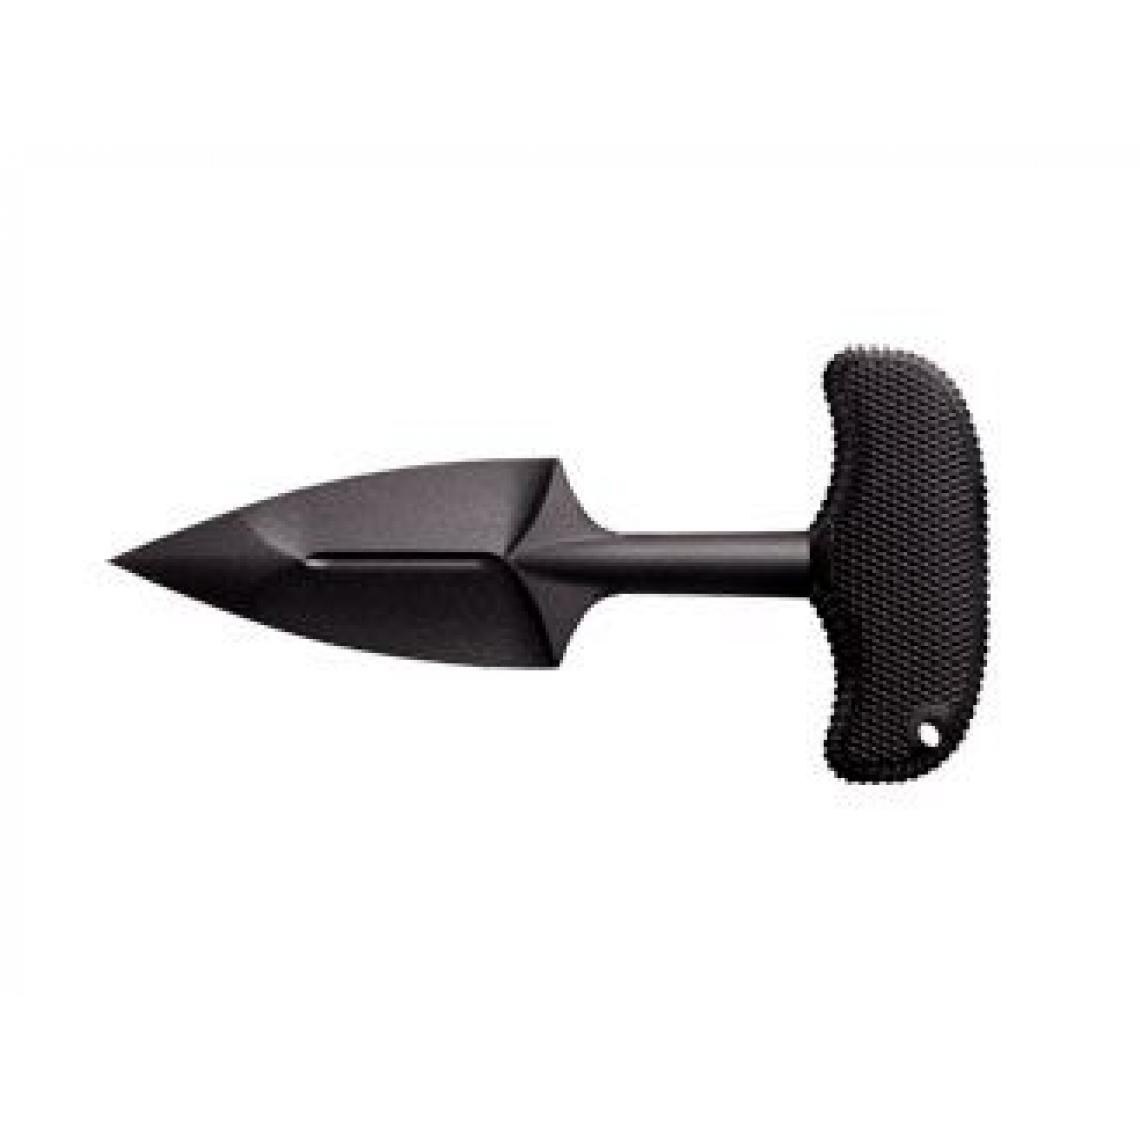 Divers Marques - Cold Steel FGX PUSH BLADE II 92FPB - Outils de coupe